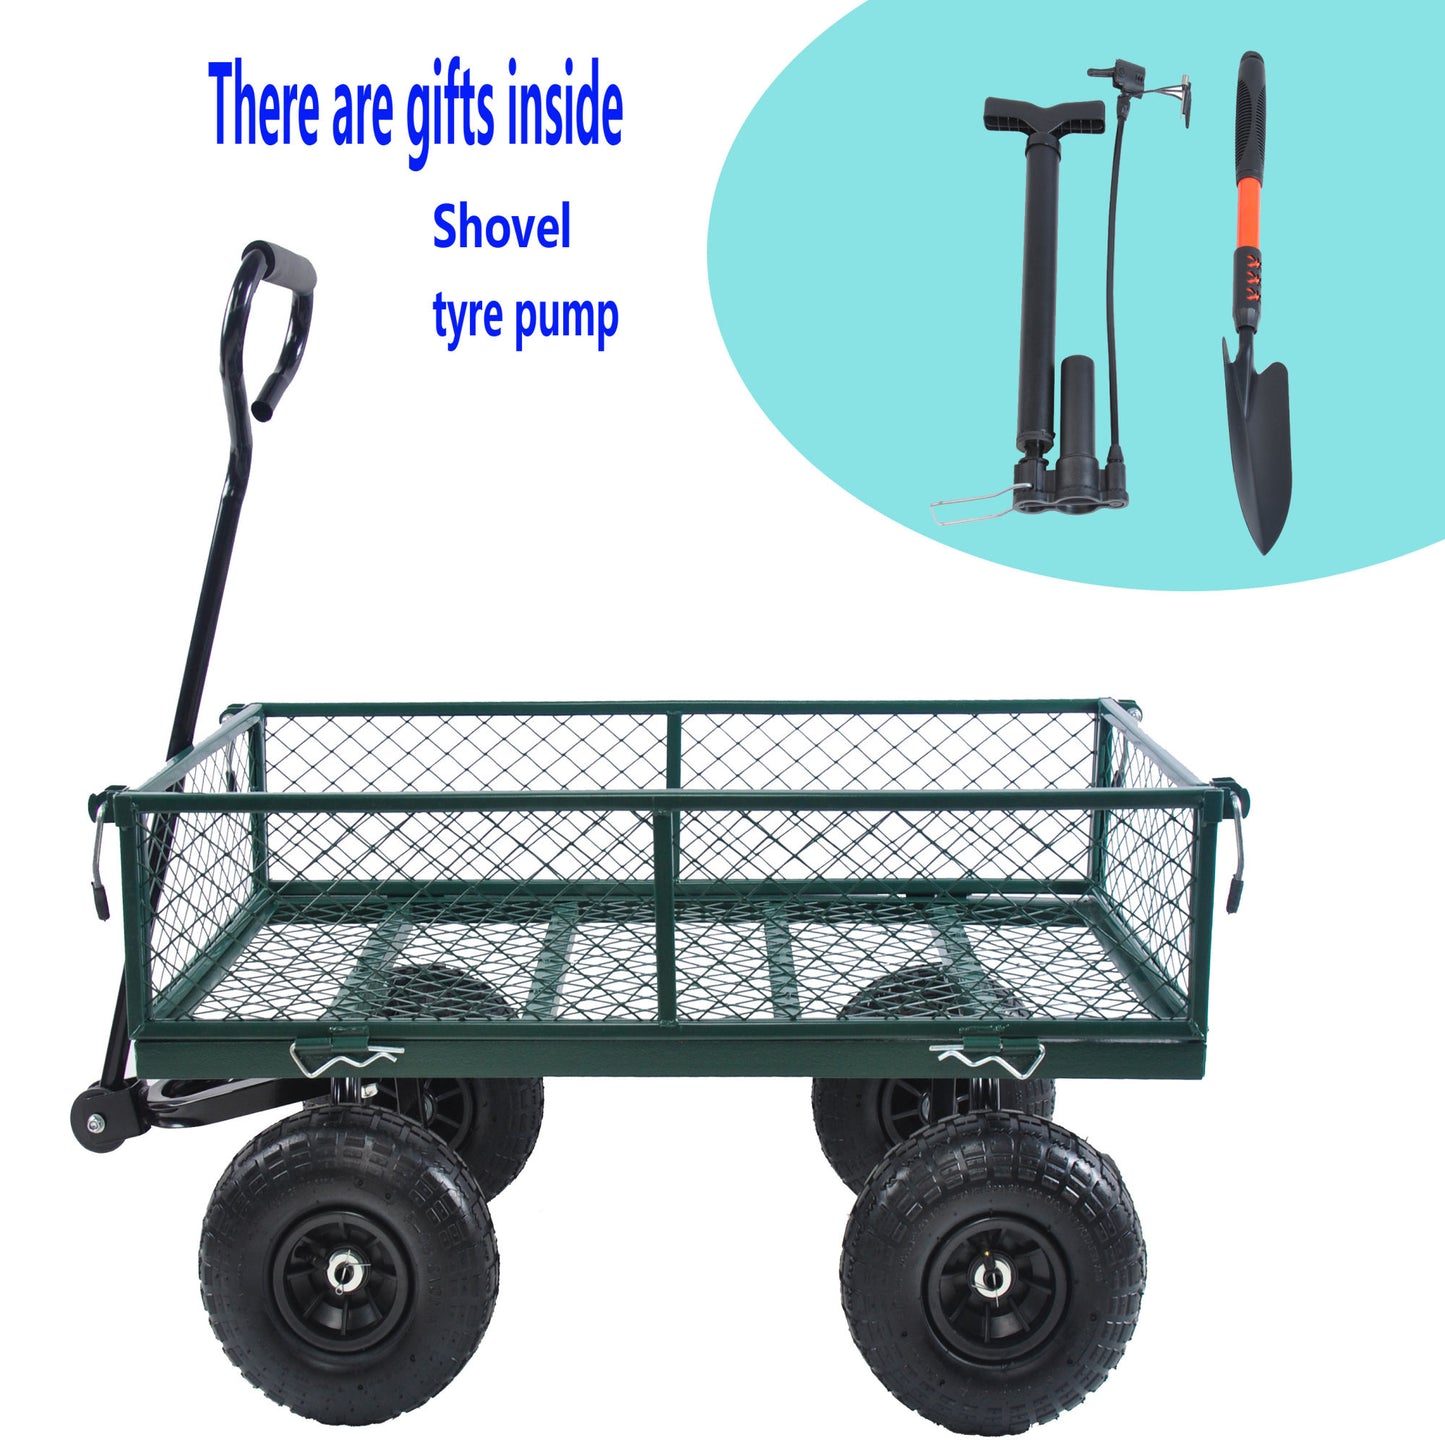 Wagon Garden cart make it easier to transport firewood and other yard work